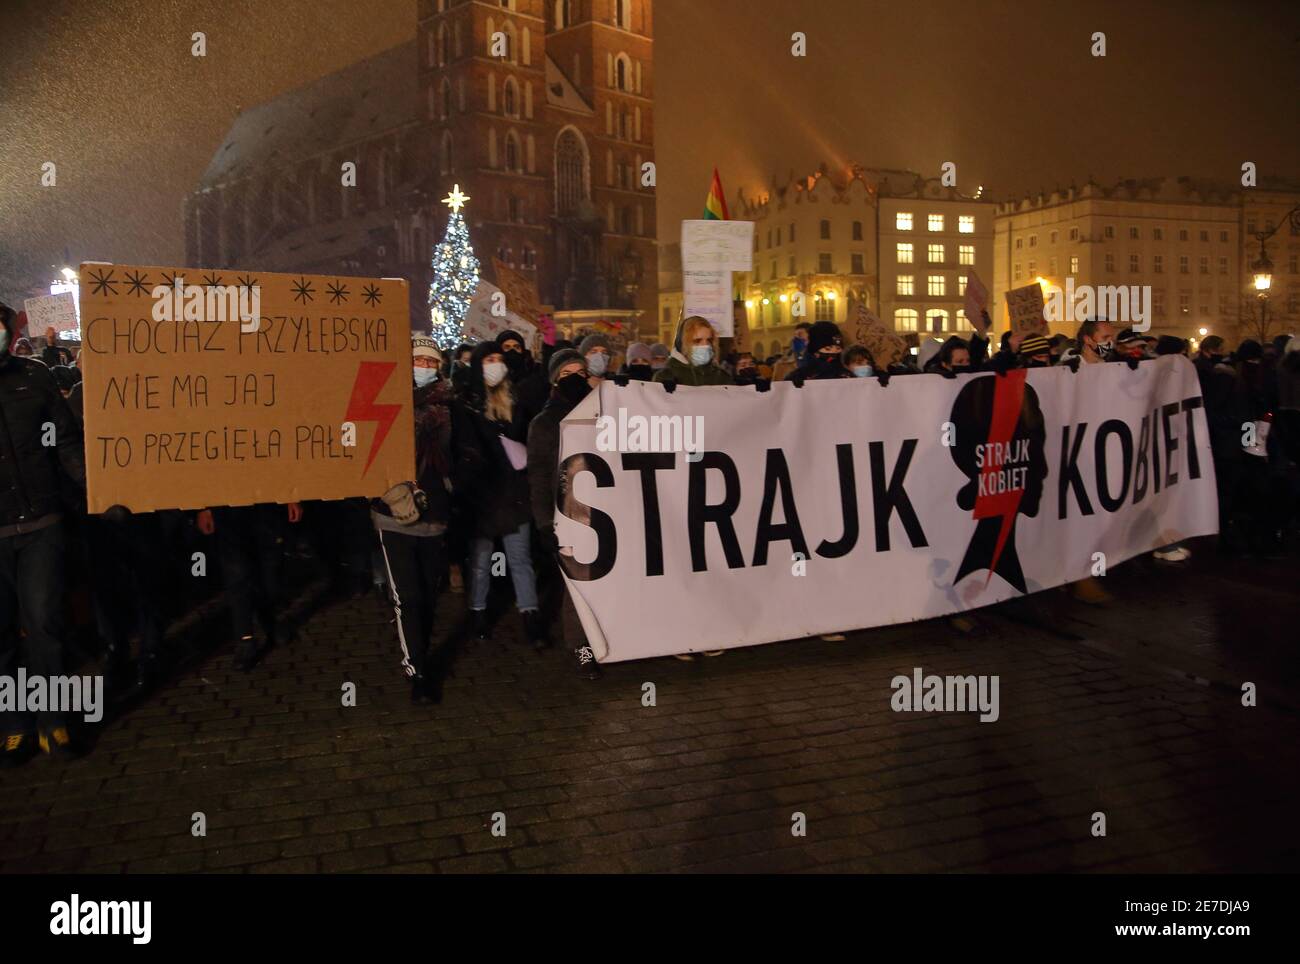 Crowd of people demonstrate with banners against decision to almost total ban barortion in Poland, Krakow evening snowy street, women strike movement Stock Photo